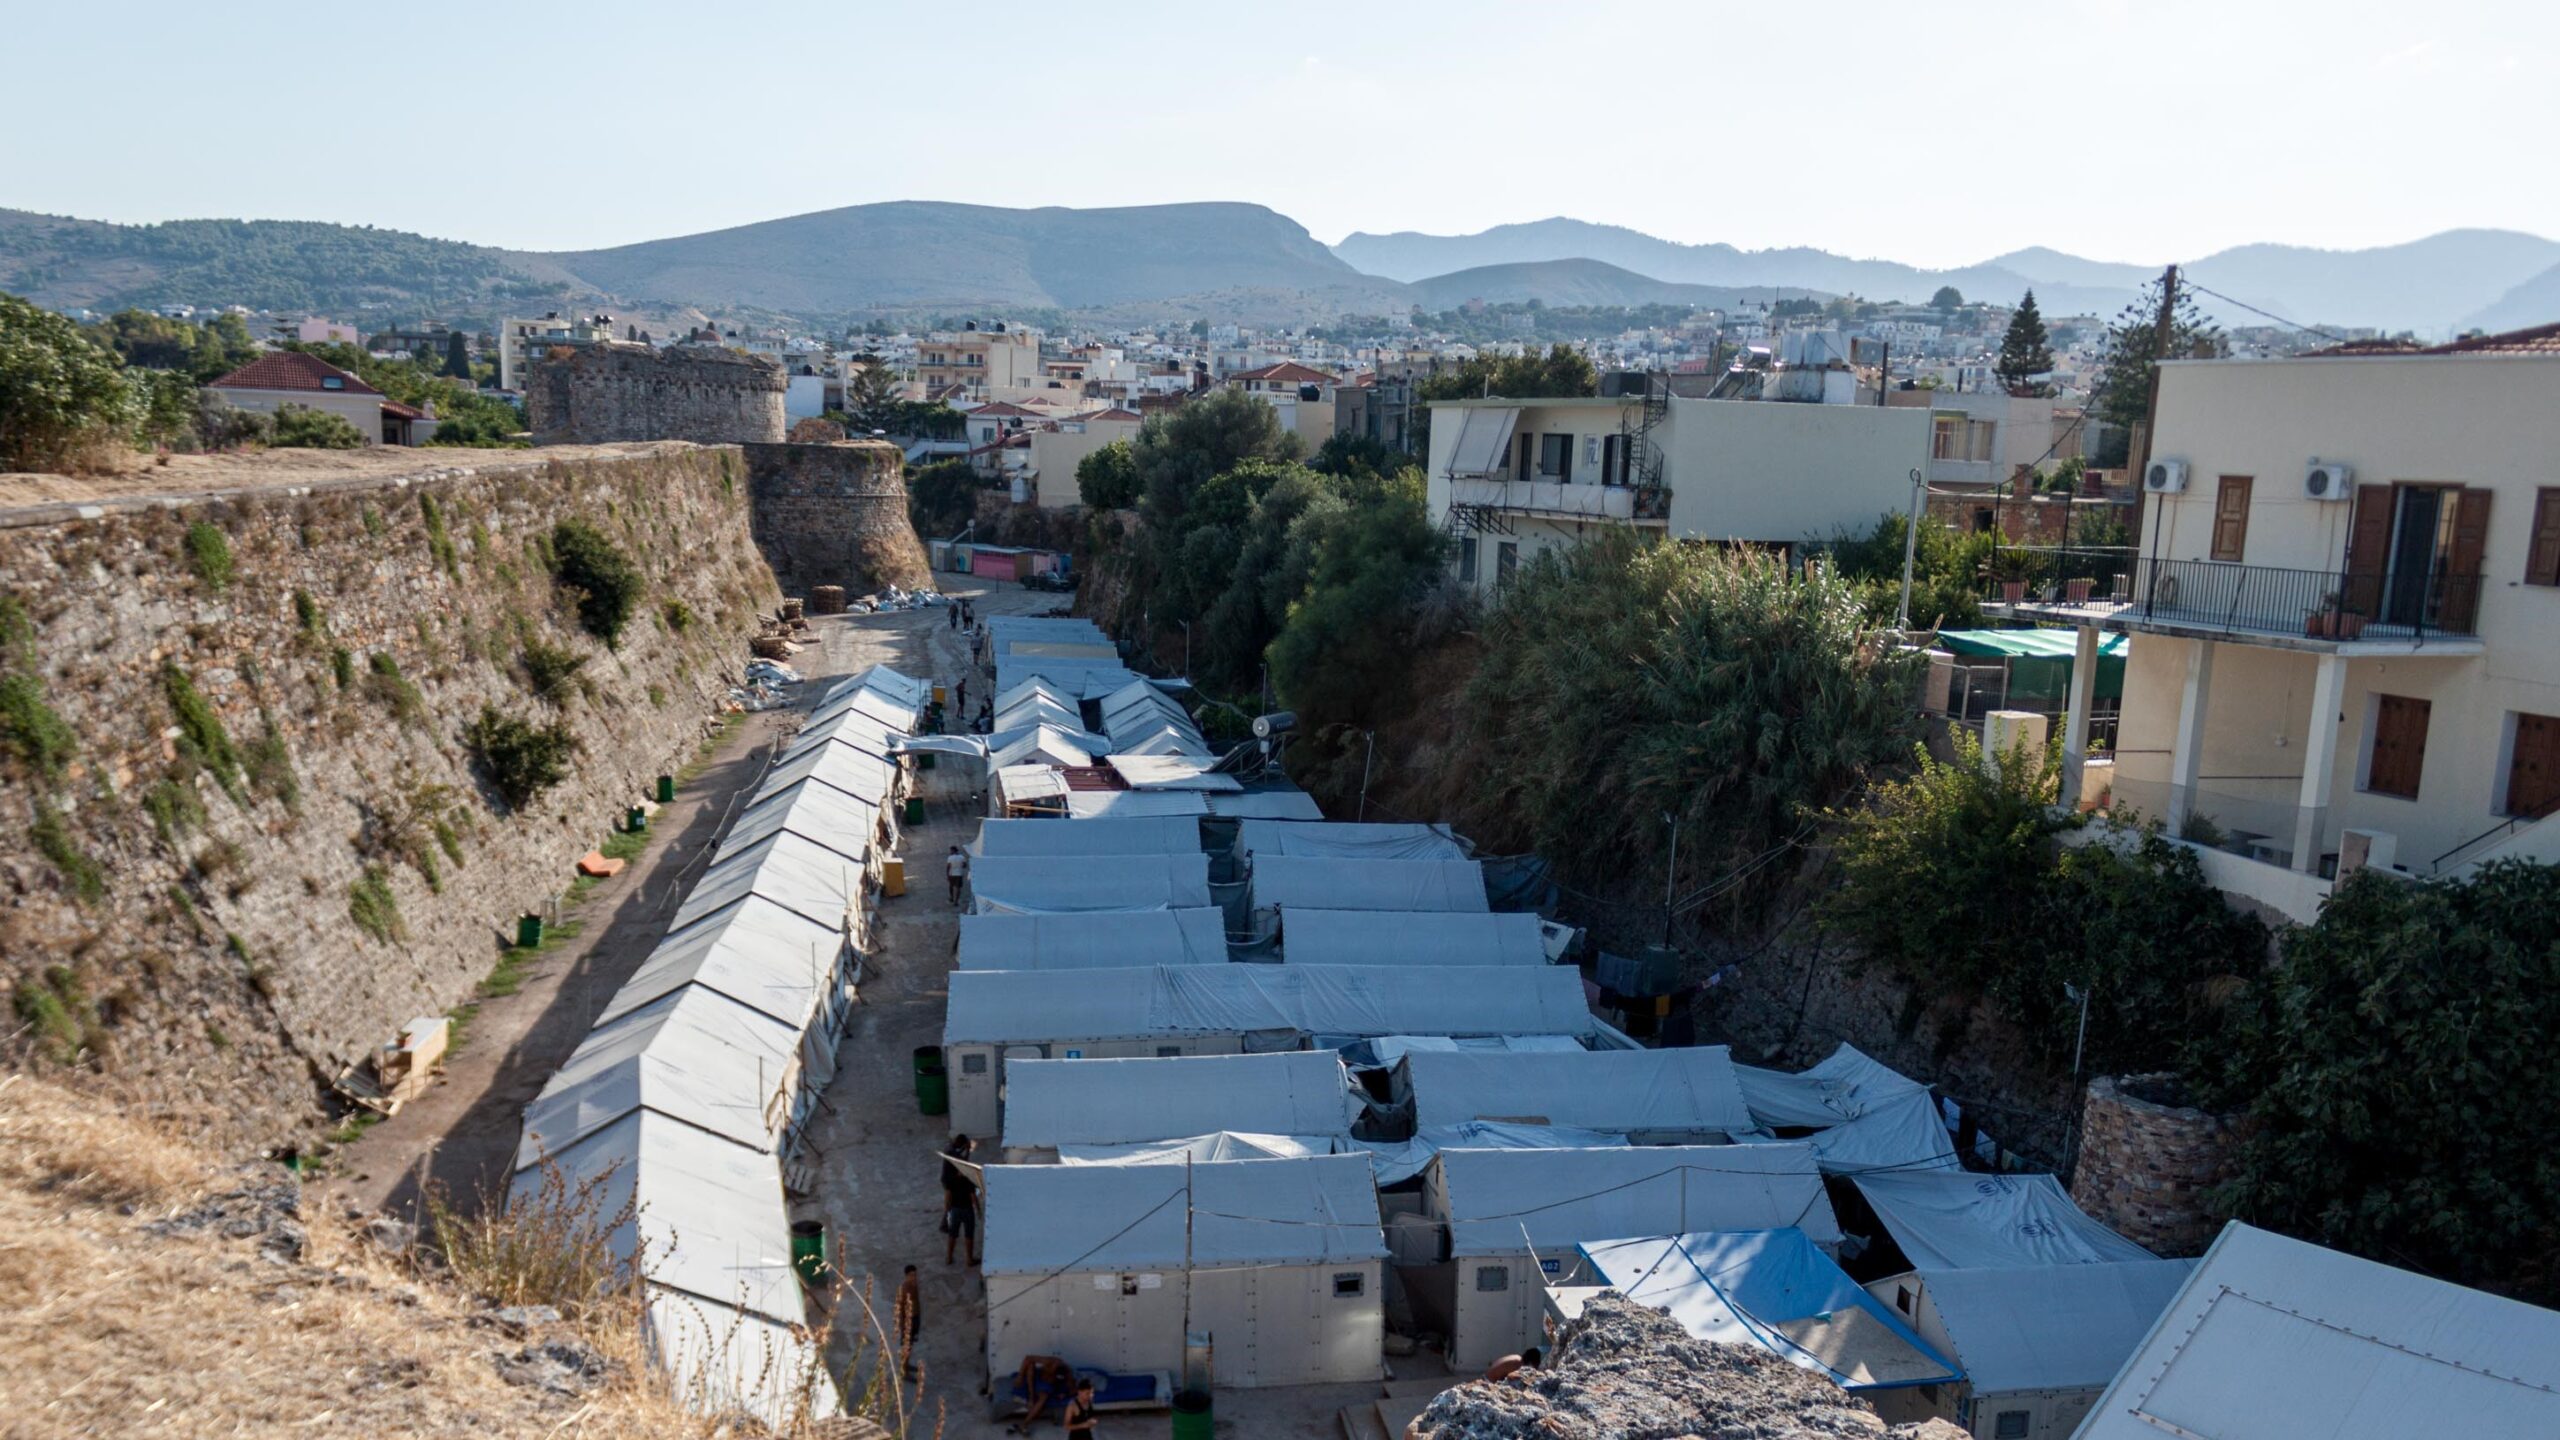 On a Greek island, humanitarian groups' funding dries up